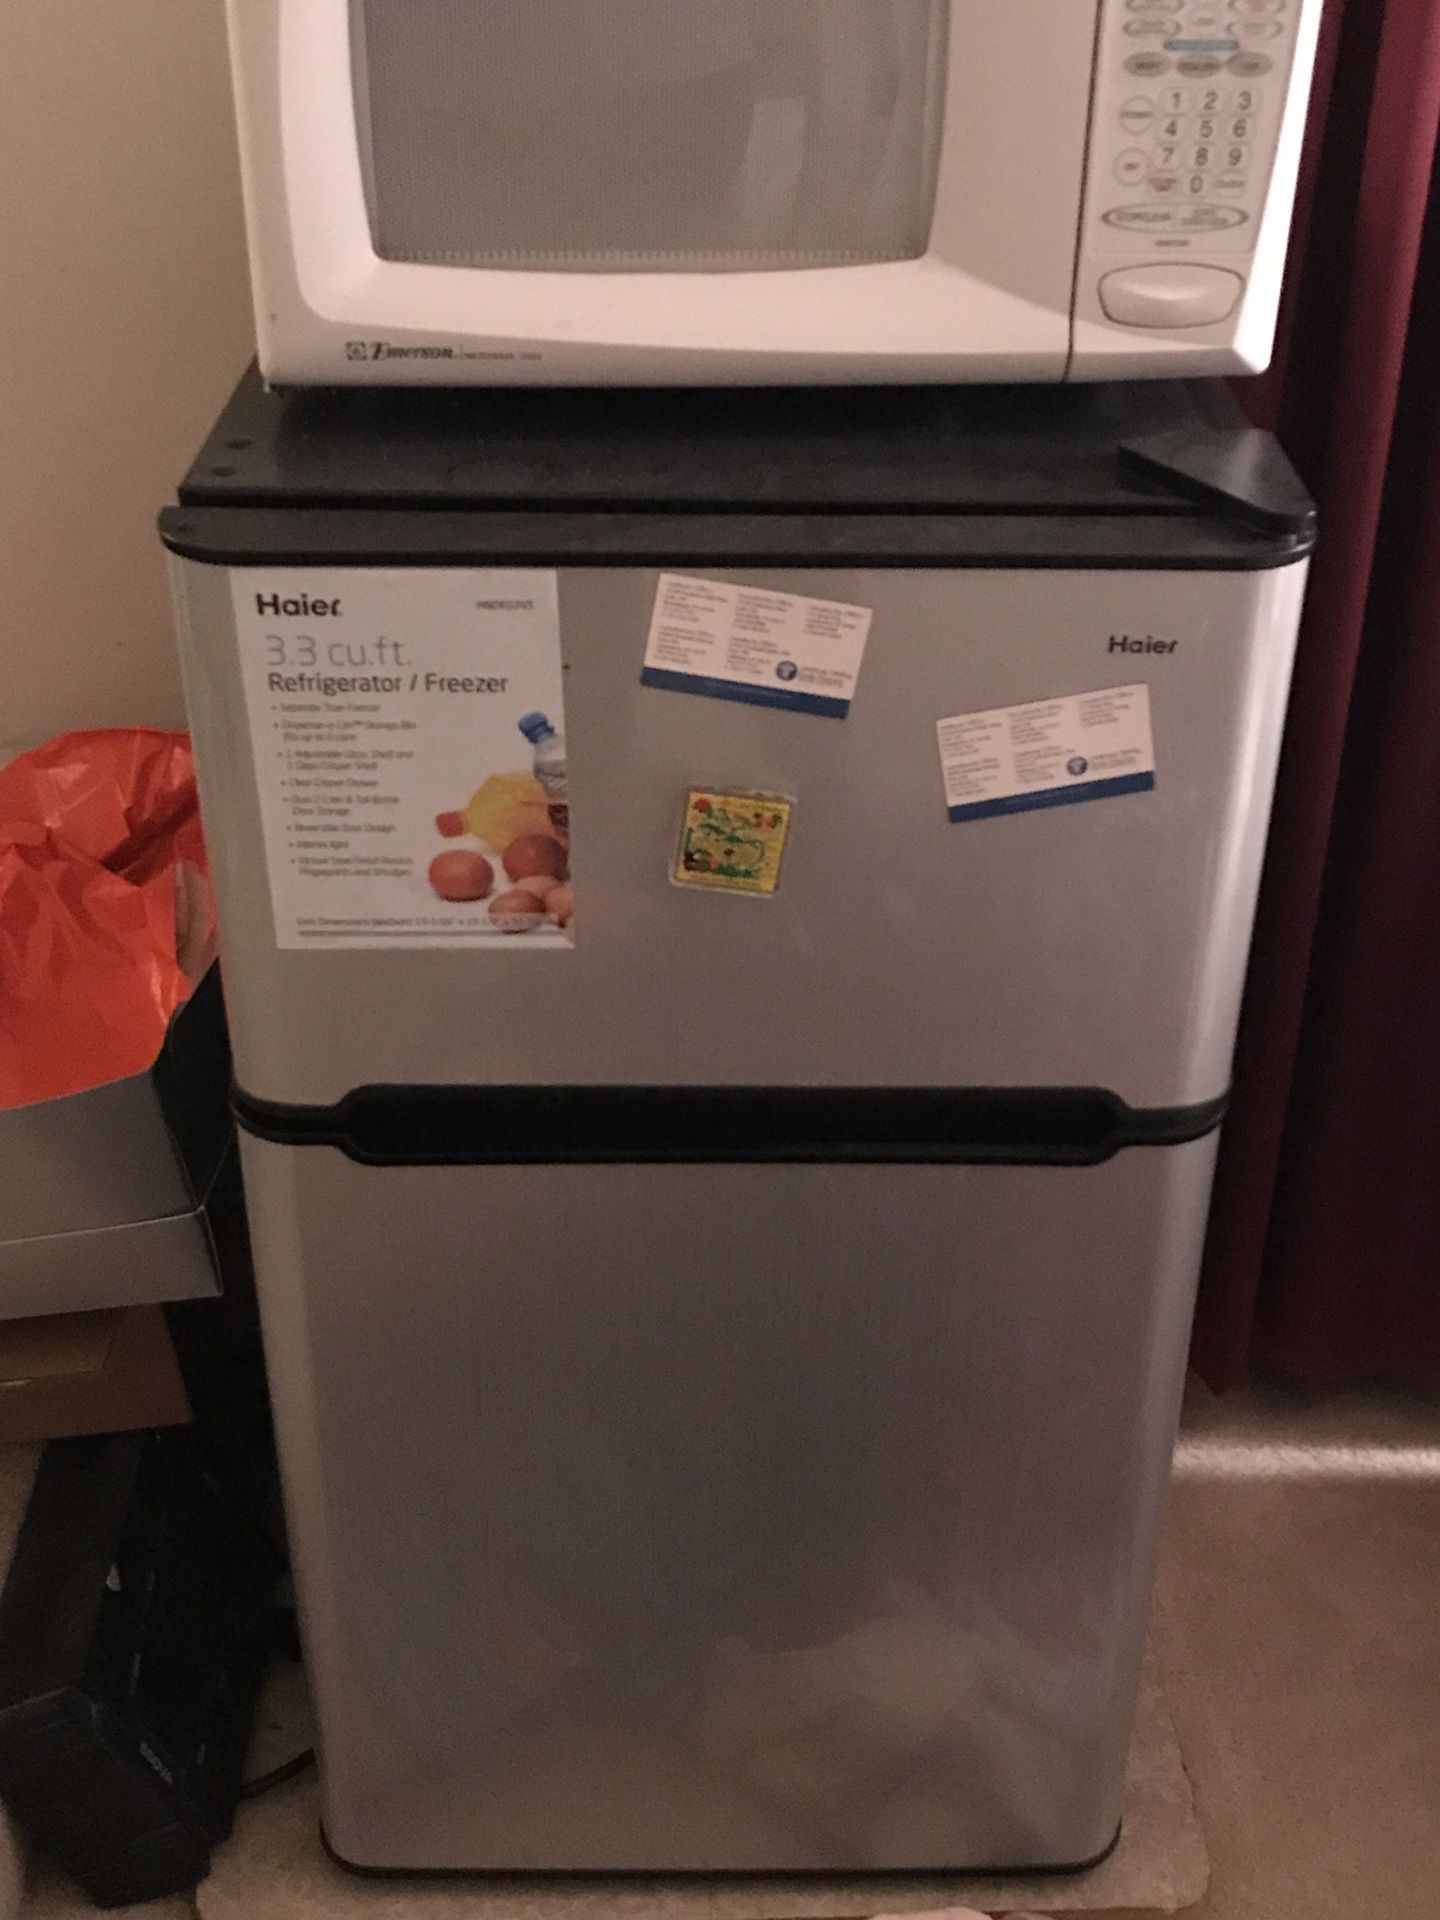 Small refrigerator & freezer for bedroom or living room